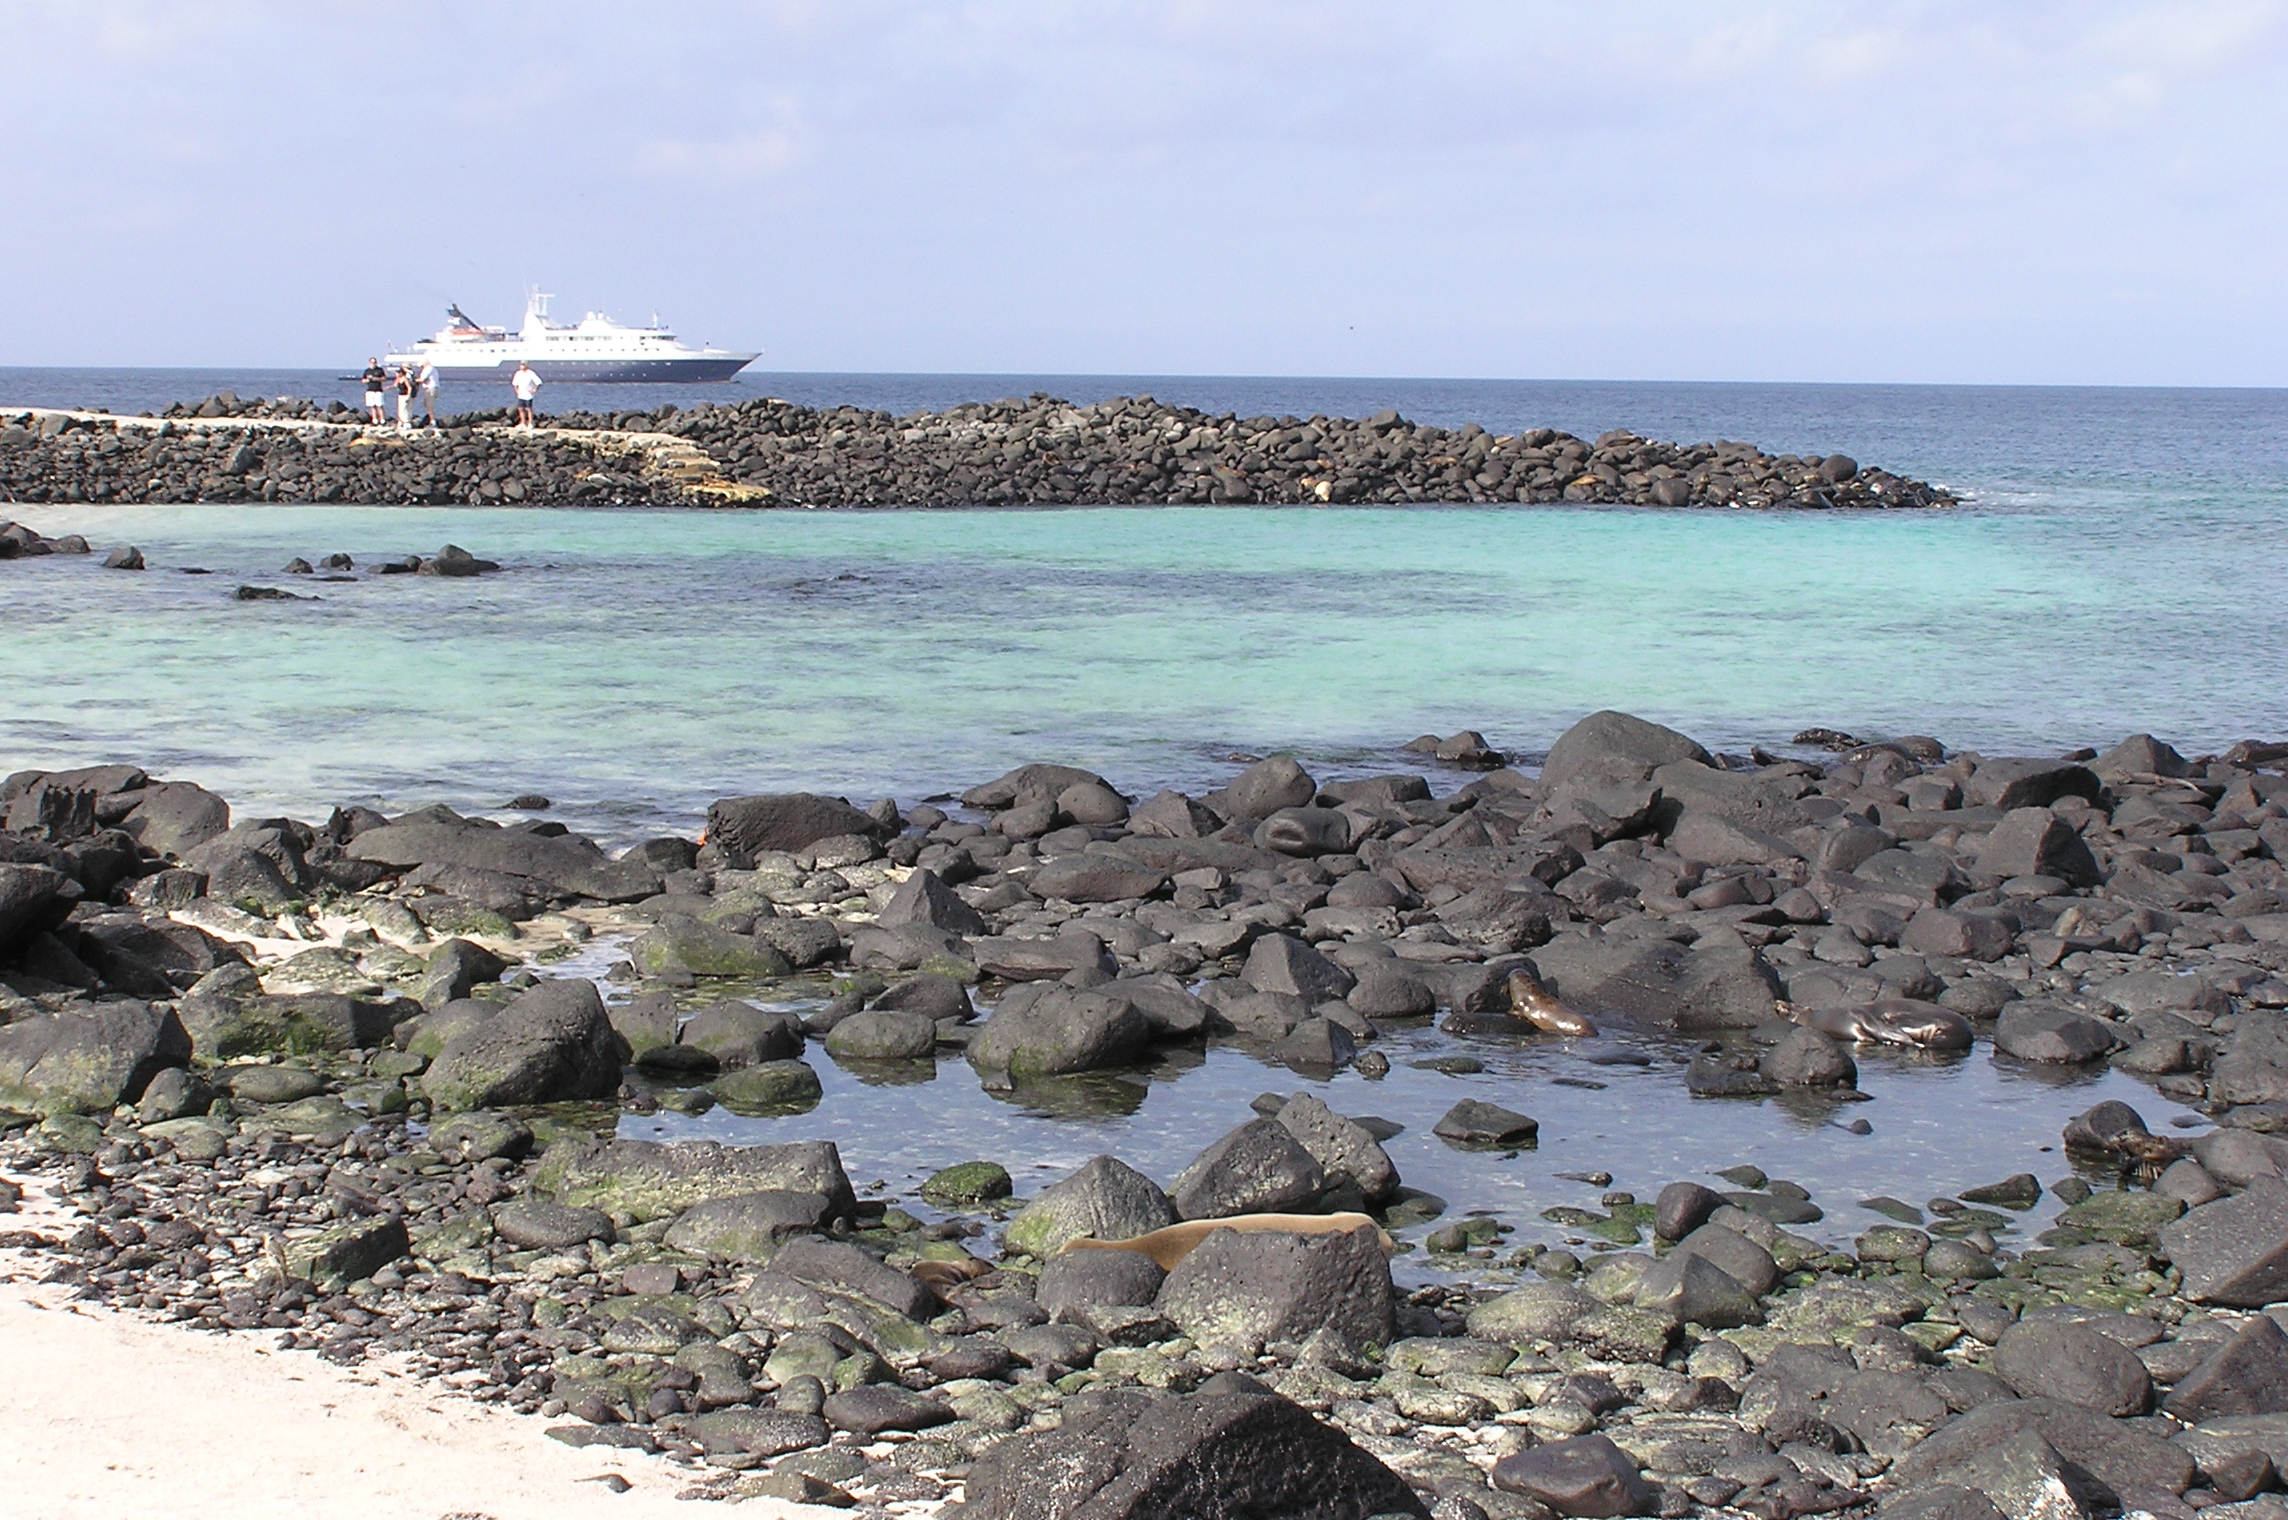 View of ship from Espanola Island